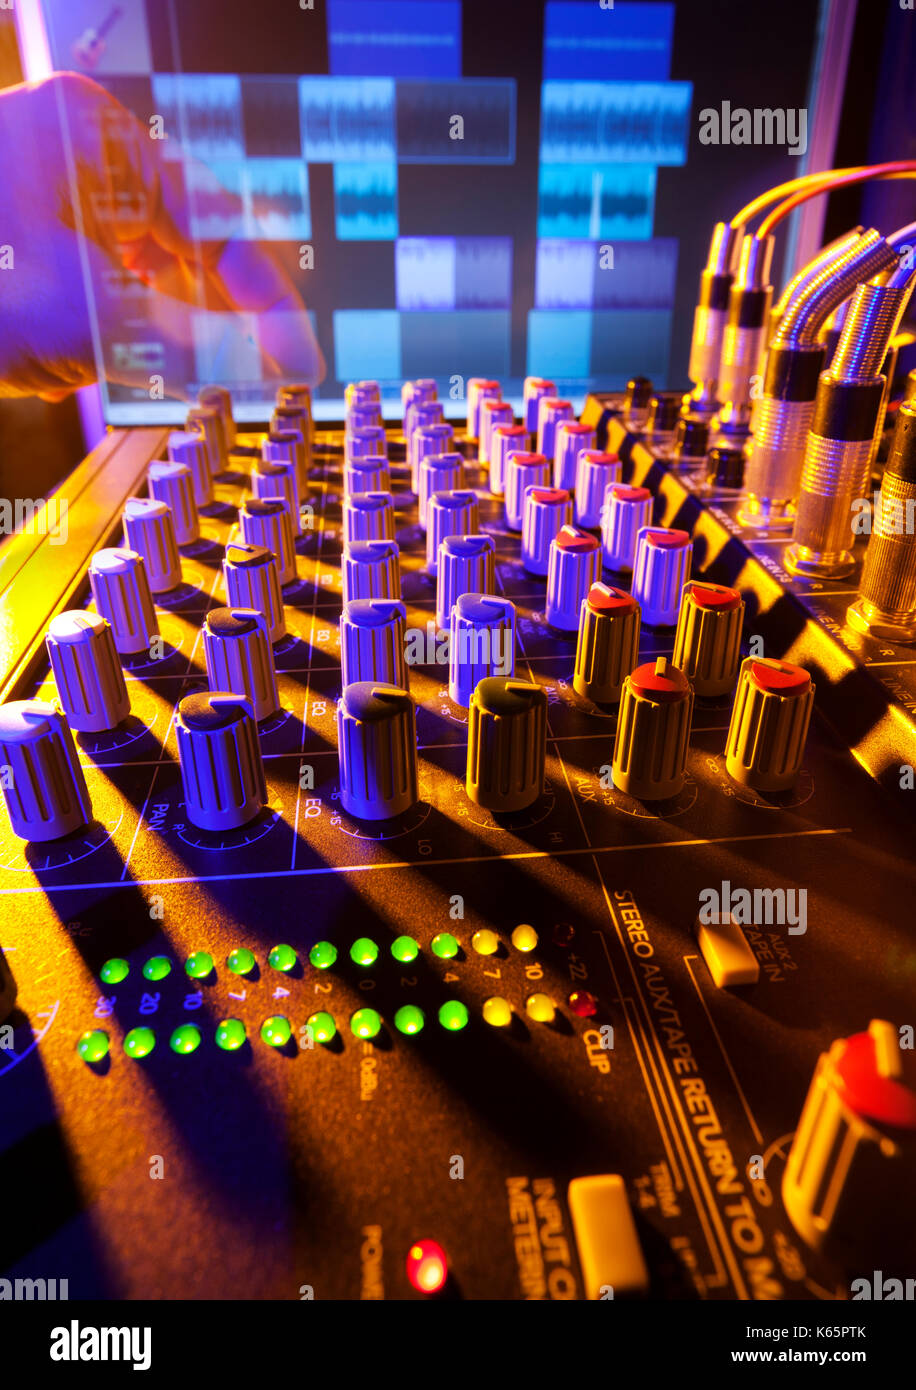 Close-up of an audio mixing desk with background computer screen. Motion blurred hand on distant controls. Selective focus on mixer controls Stock Photo